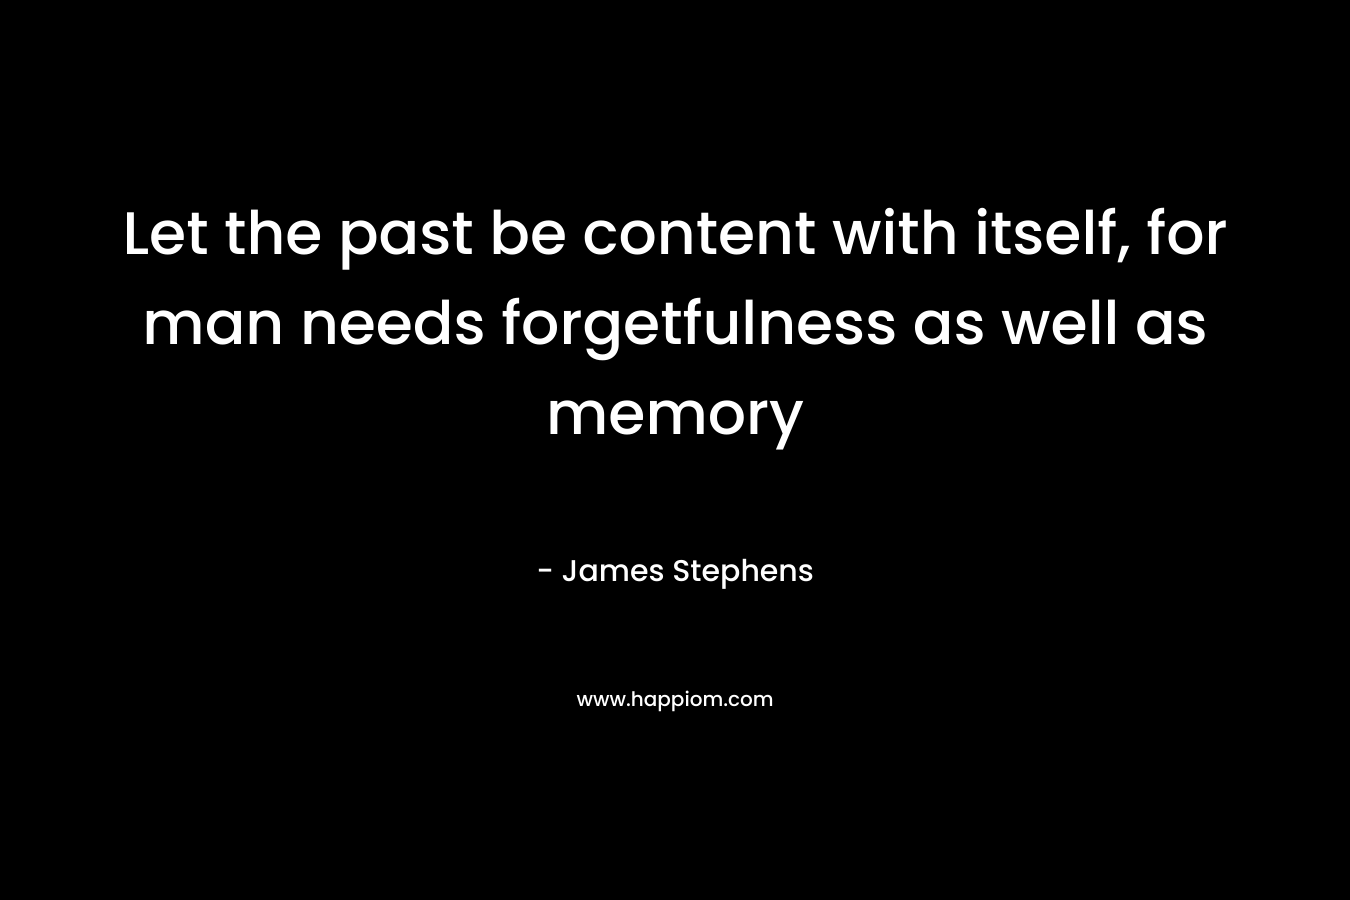 Let the past be content with itself, for man needs forgetfulness as well as memory – James Stephens